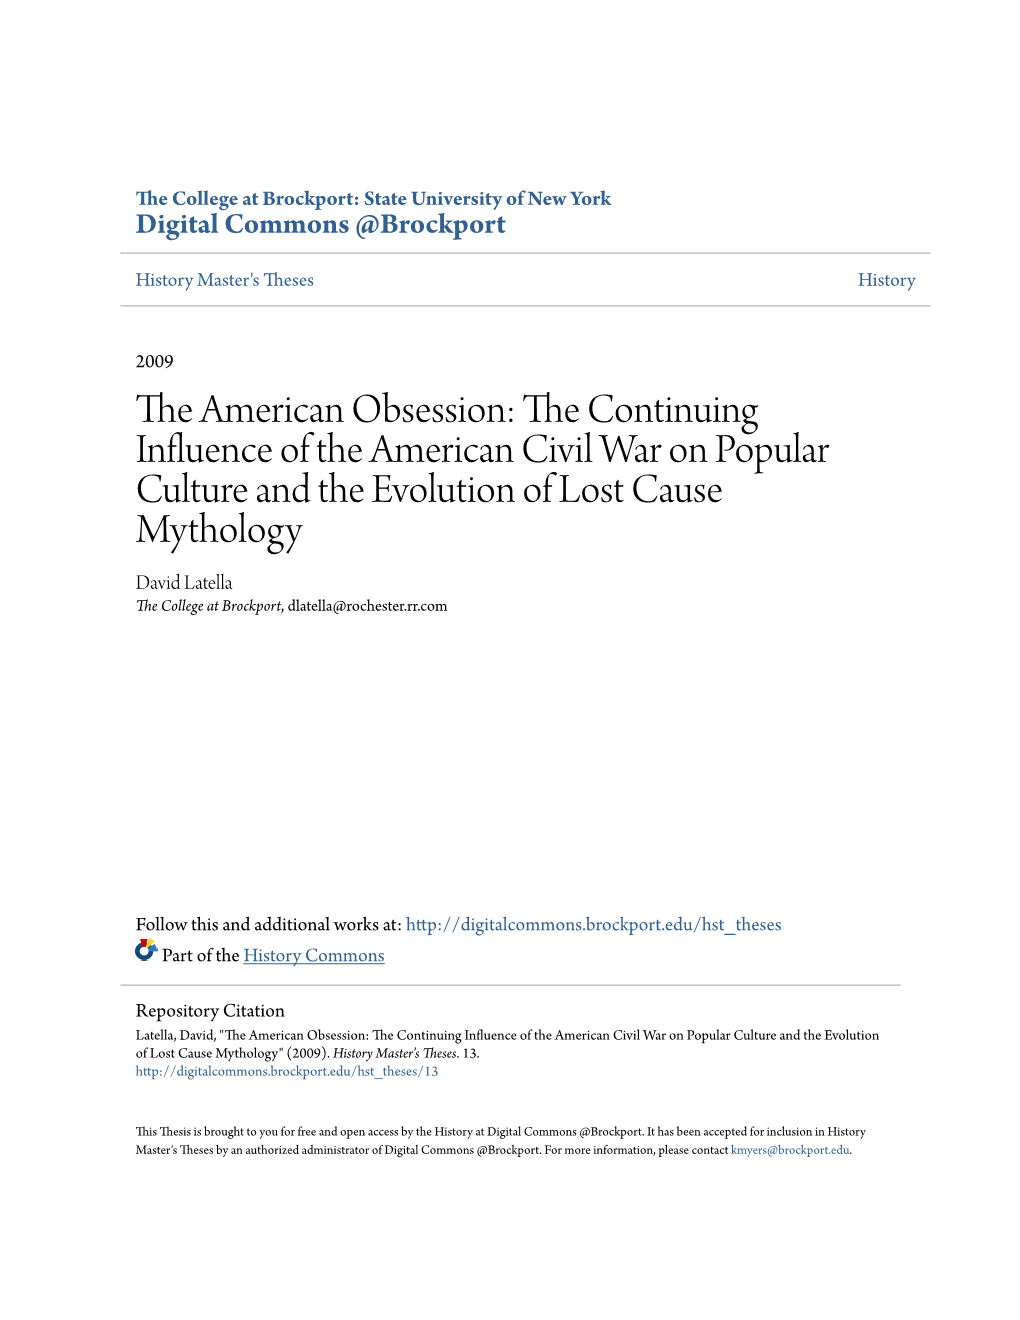 The American Obsession: the Continuing Influence of The